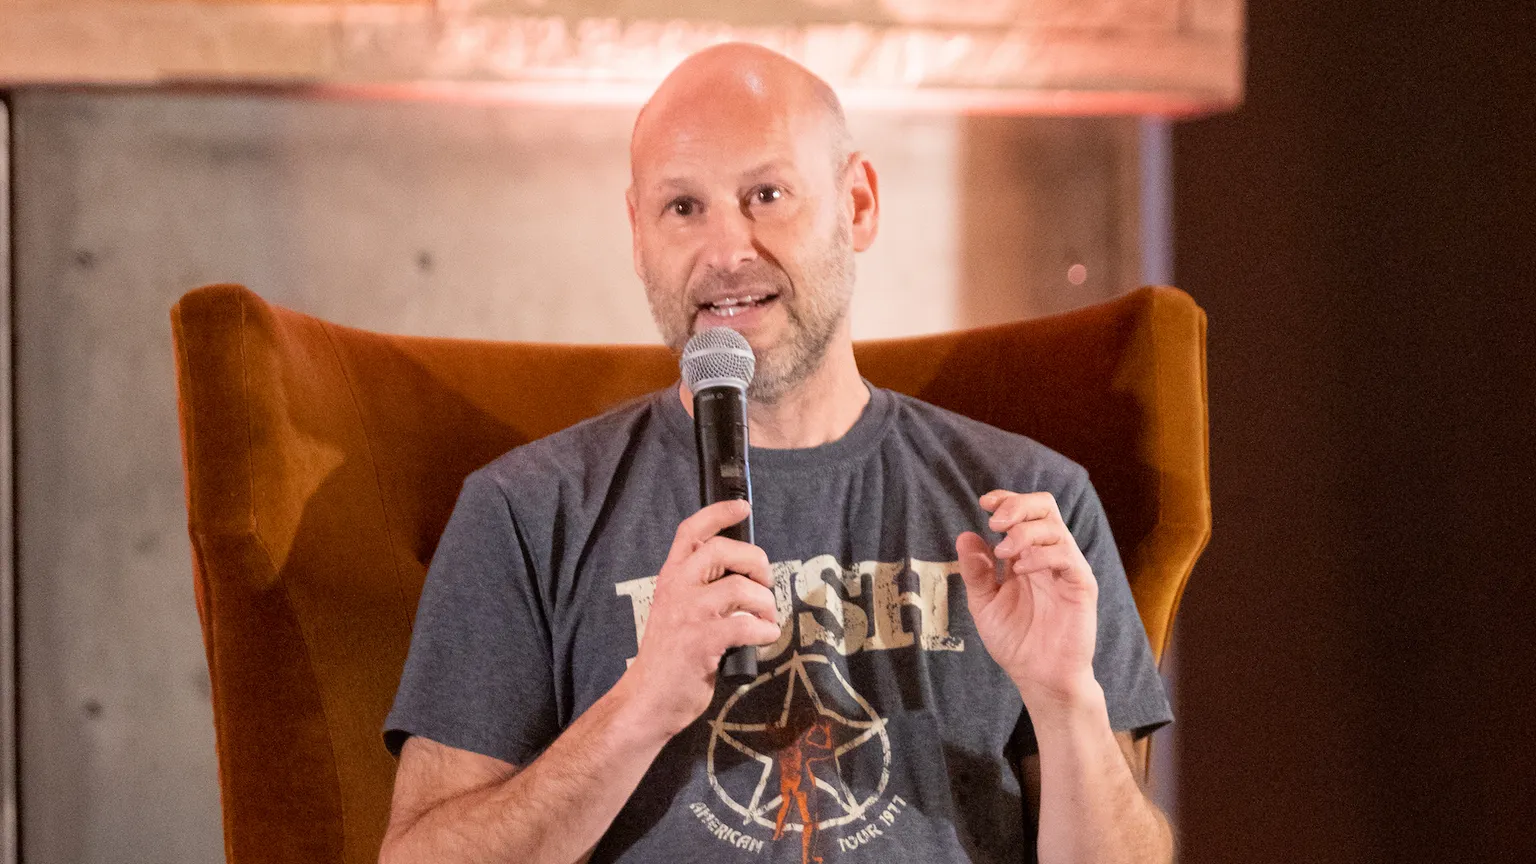 Ethereum co-founder Joe Lubin speaks at Camp Ethereal in Wyoming in March 2022. Image: Chie Endo